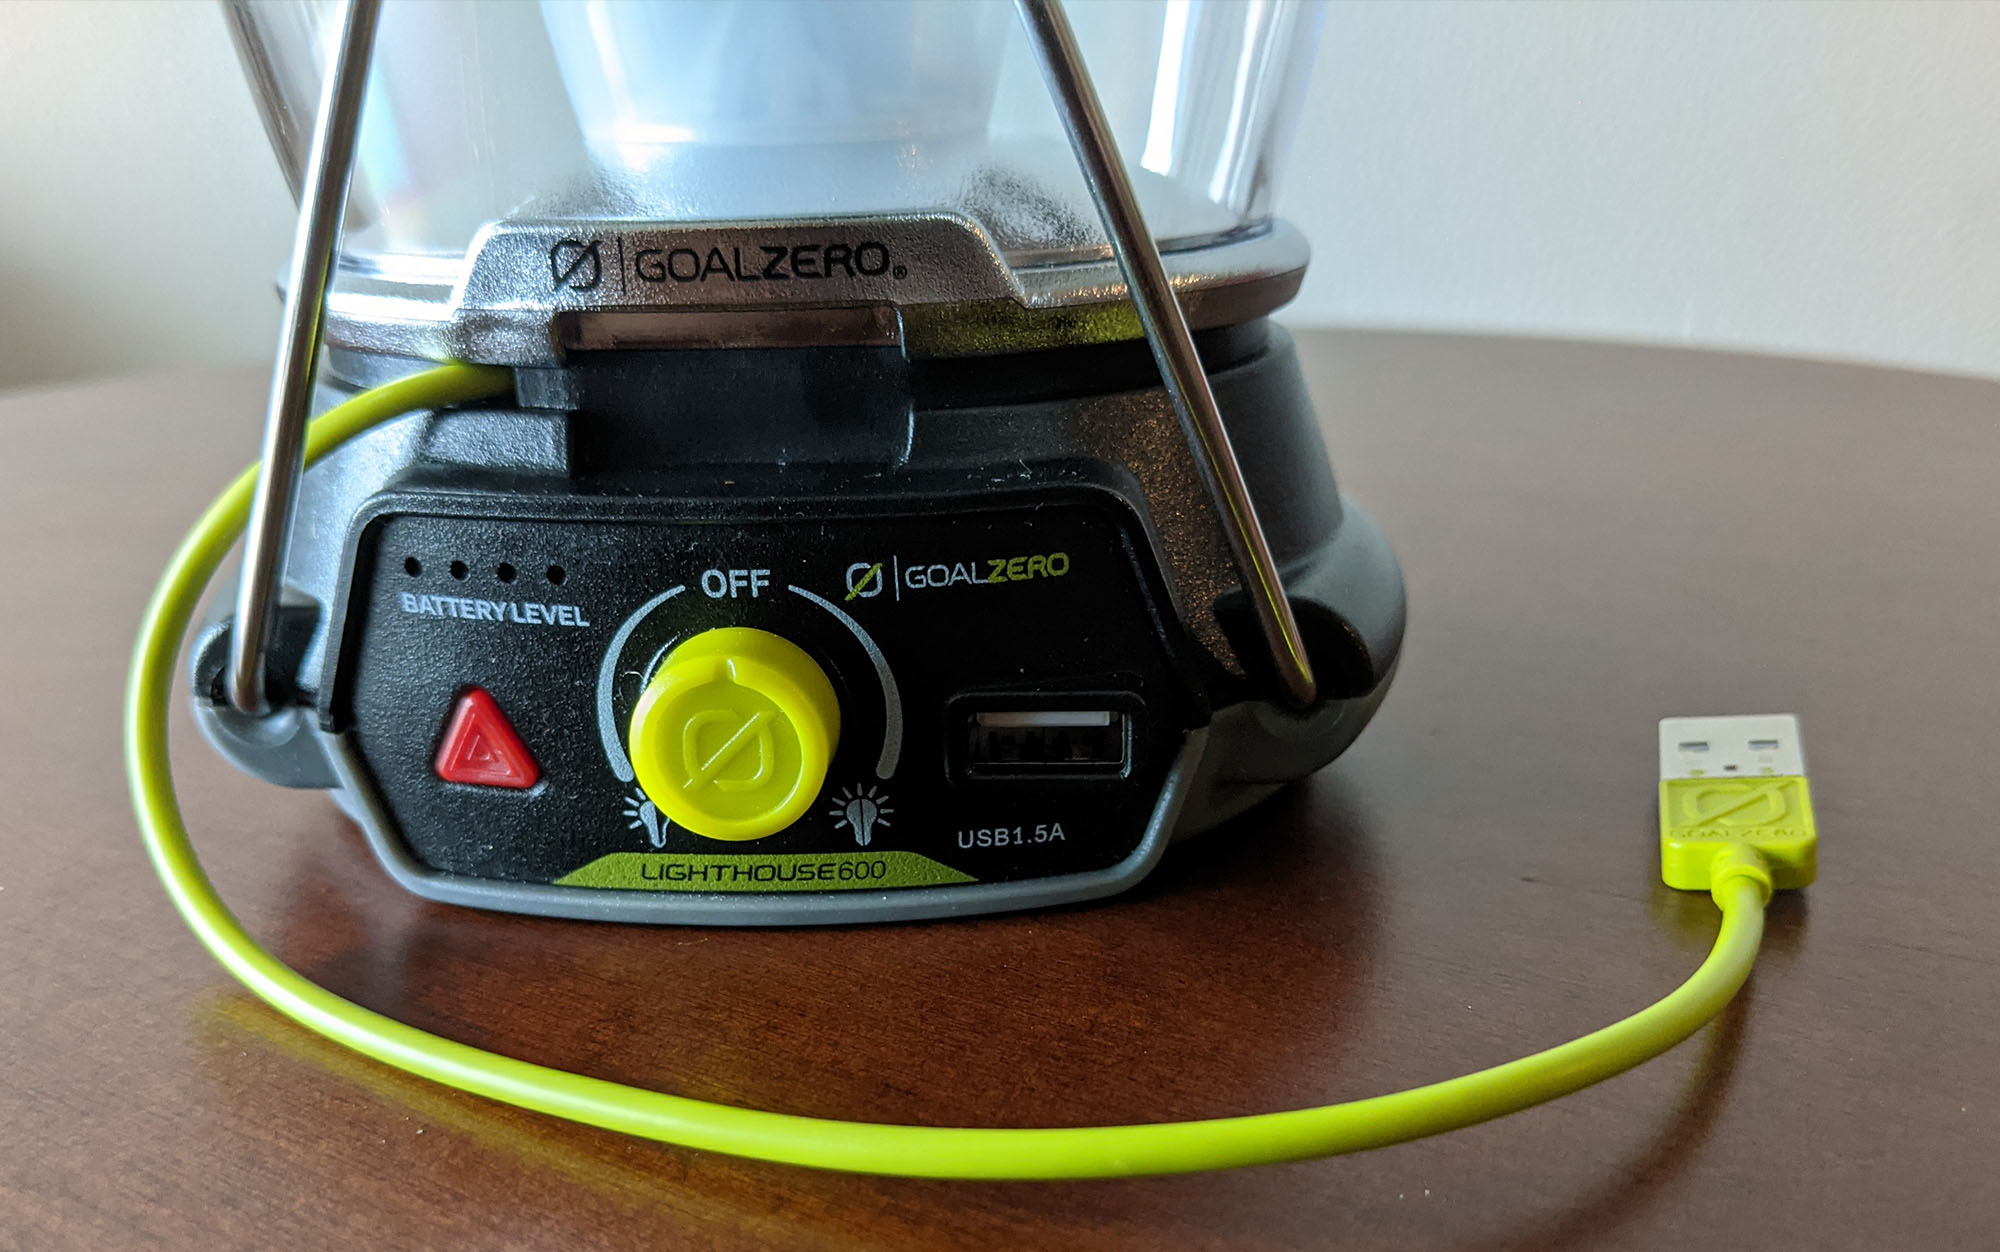 The Goal Zero has an attached USB charging cord.